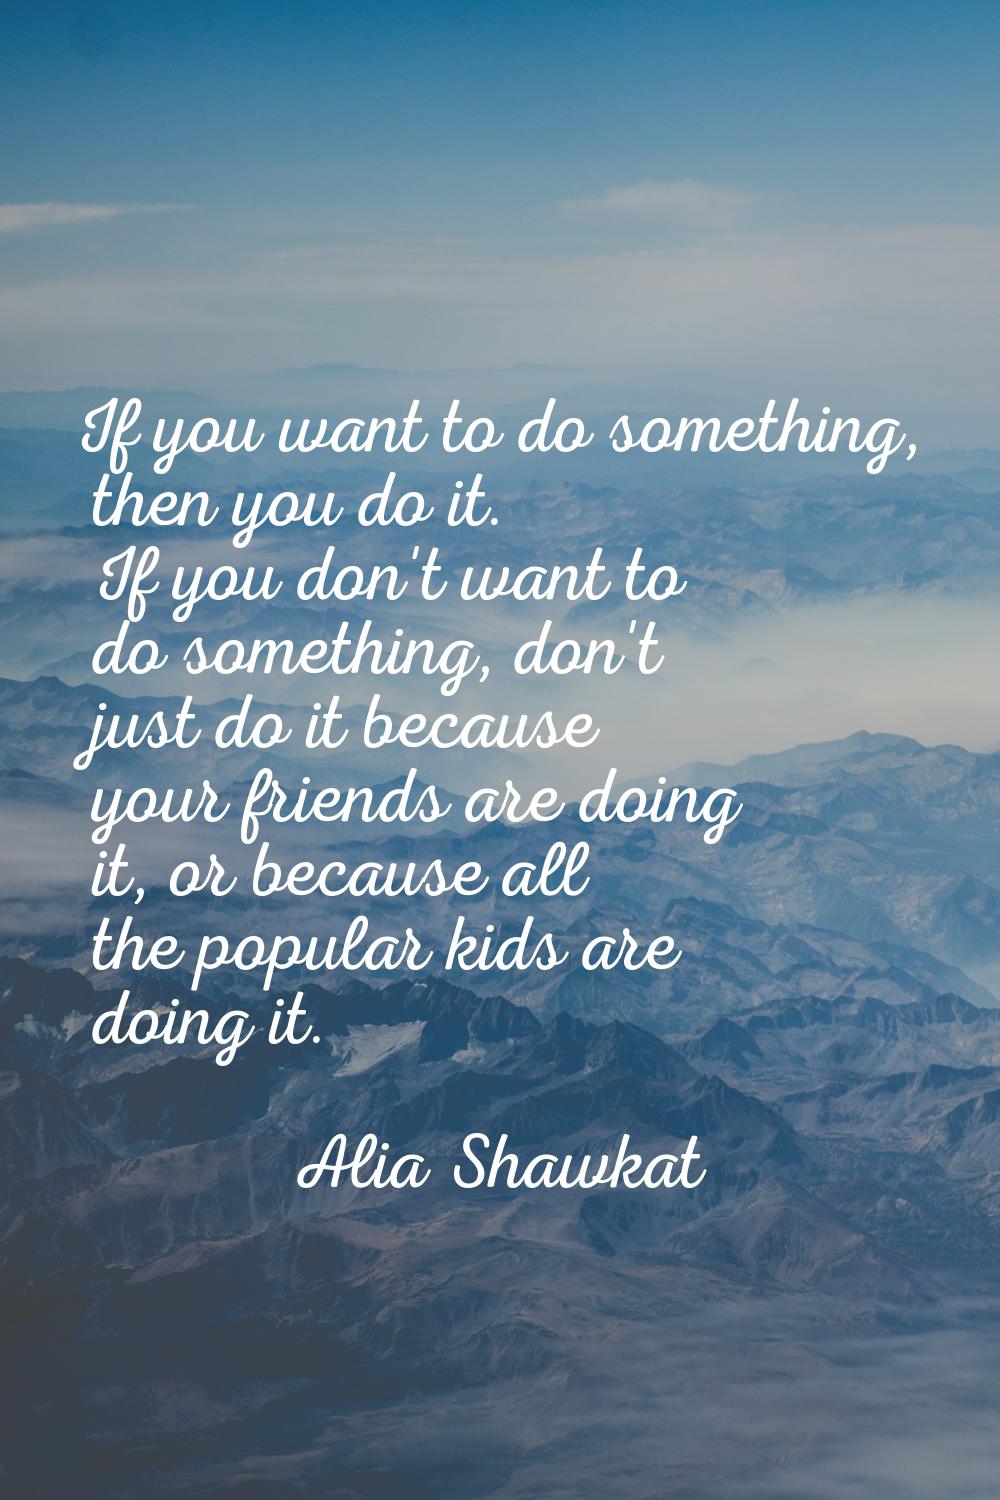 If you want to do something, then you do it. If you don't want to do something, don't just do it be